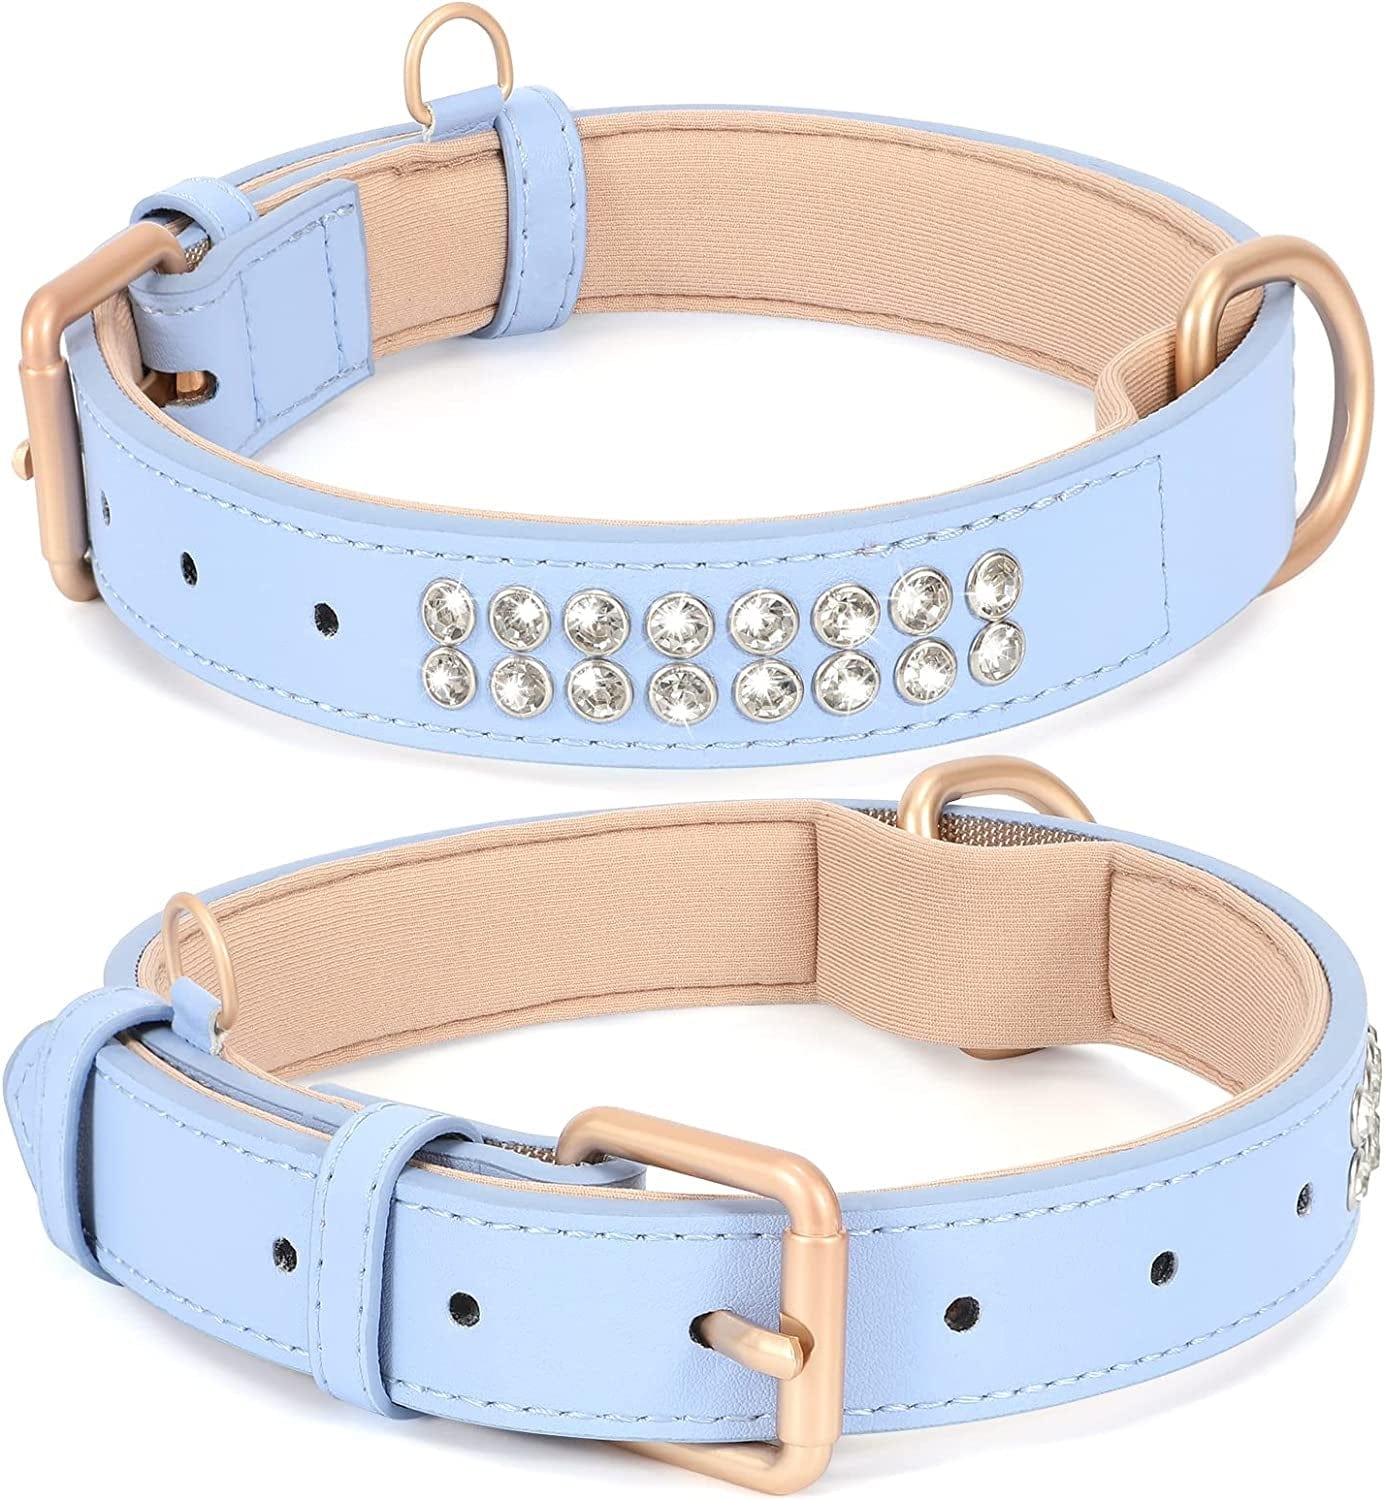 WHIPPY Airtag Leather Dog Collar GPS Tracker Air Tag Puppy Collar Adjustable Soft Leather Padded Dog Collar with Airtag Holder Case for Small Medium Large Dog Pet Backpack,Pink,M Electronics > GPS Accessories > GPS Cases WHIPPY G-blue collar diamond S:Neck 13"-17",Width 0.78" 